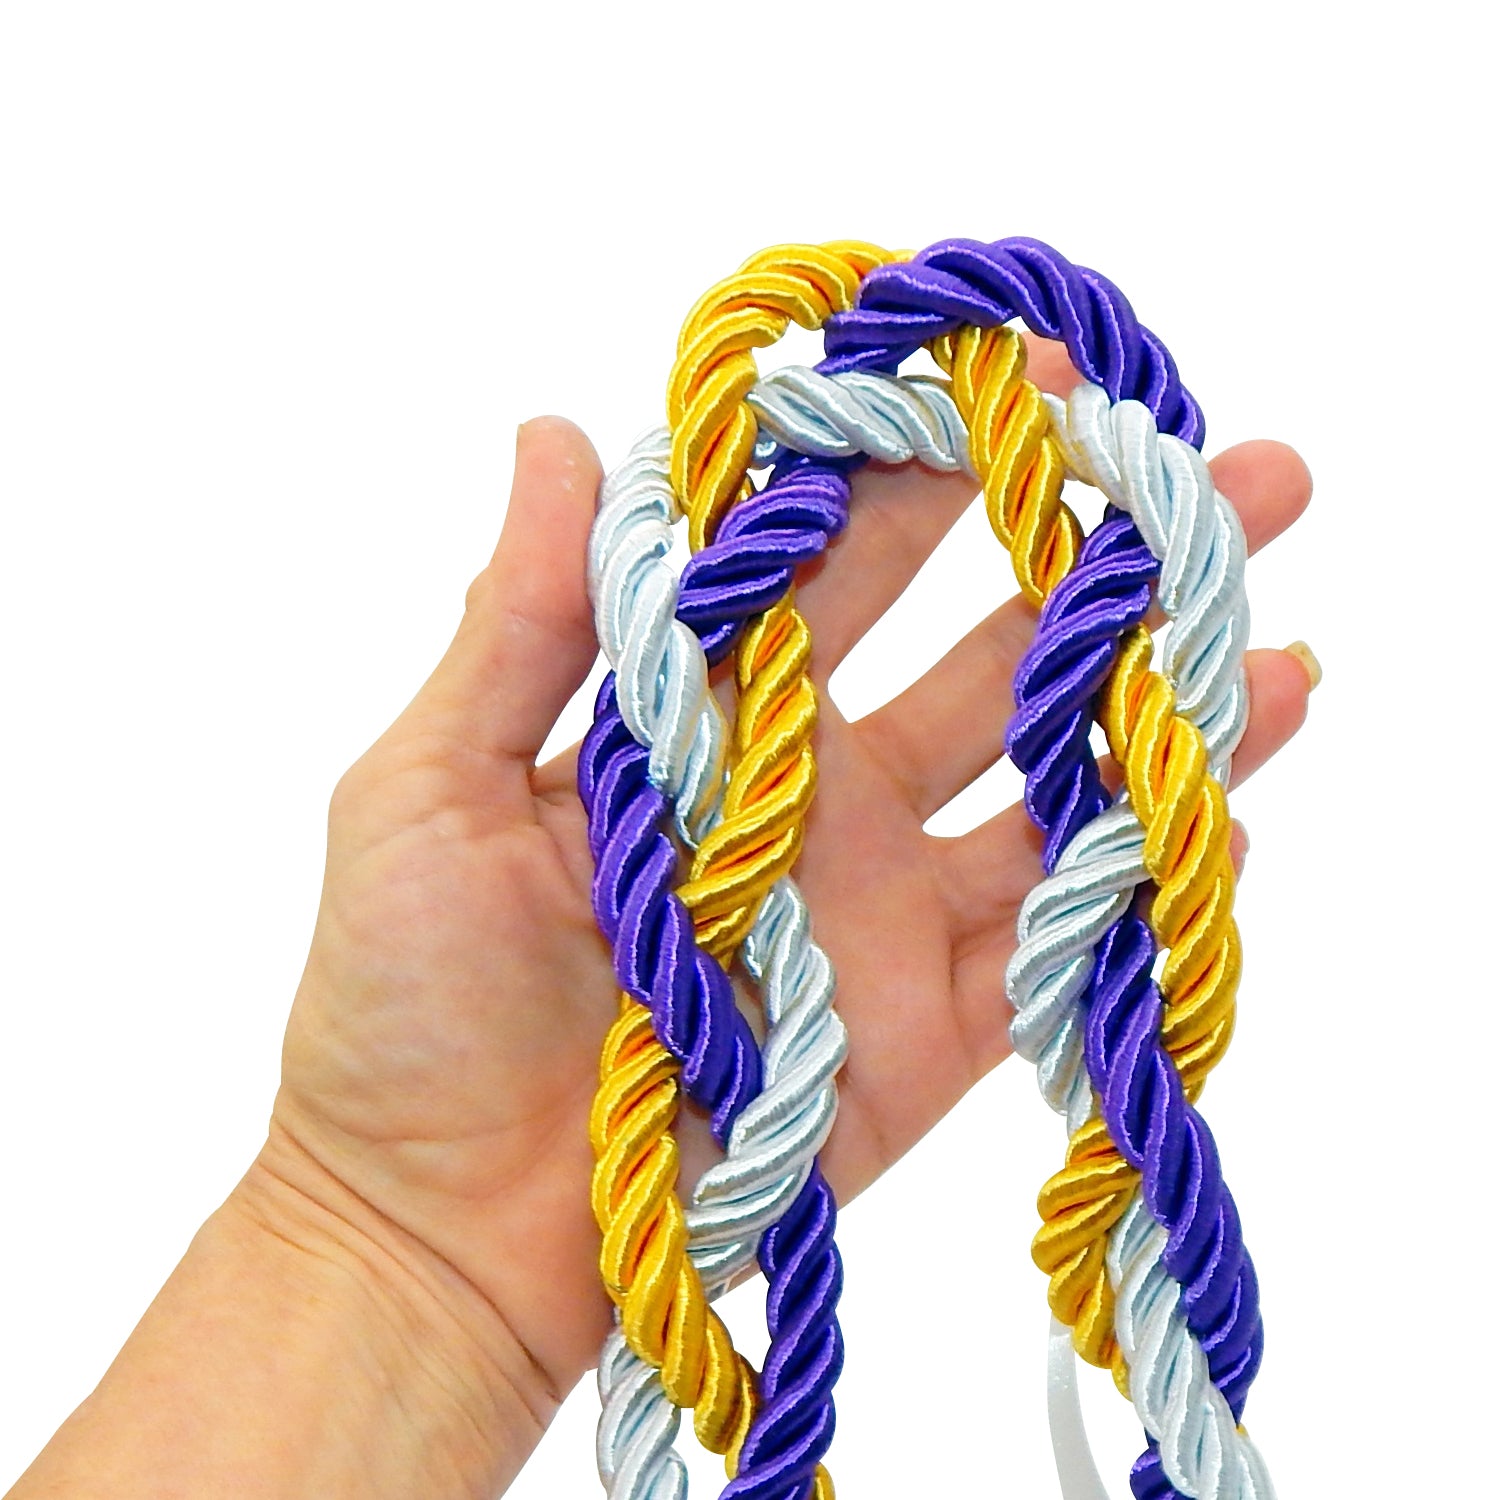 A Cord of Three Strands, Unity Braids®, Unity Knot, Wedding Gift, 1/2" Thick Cords - Unity Braids